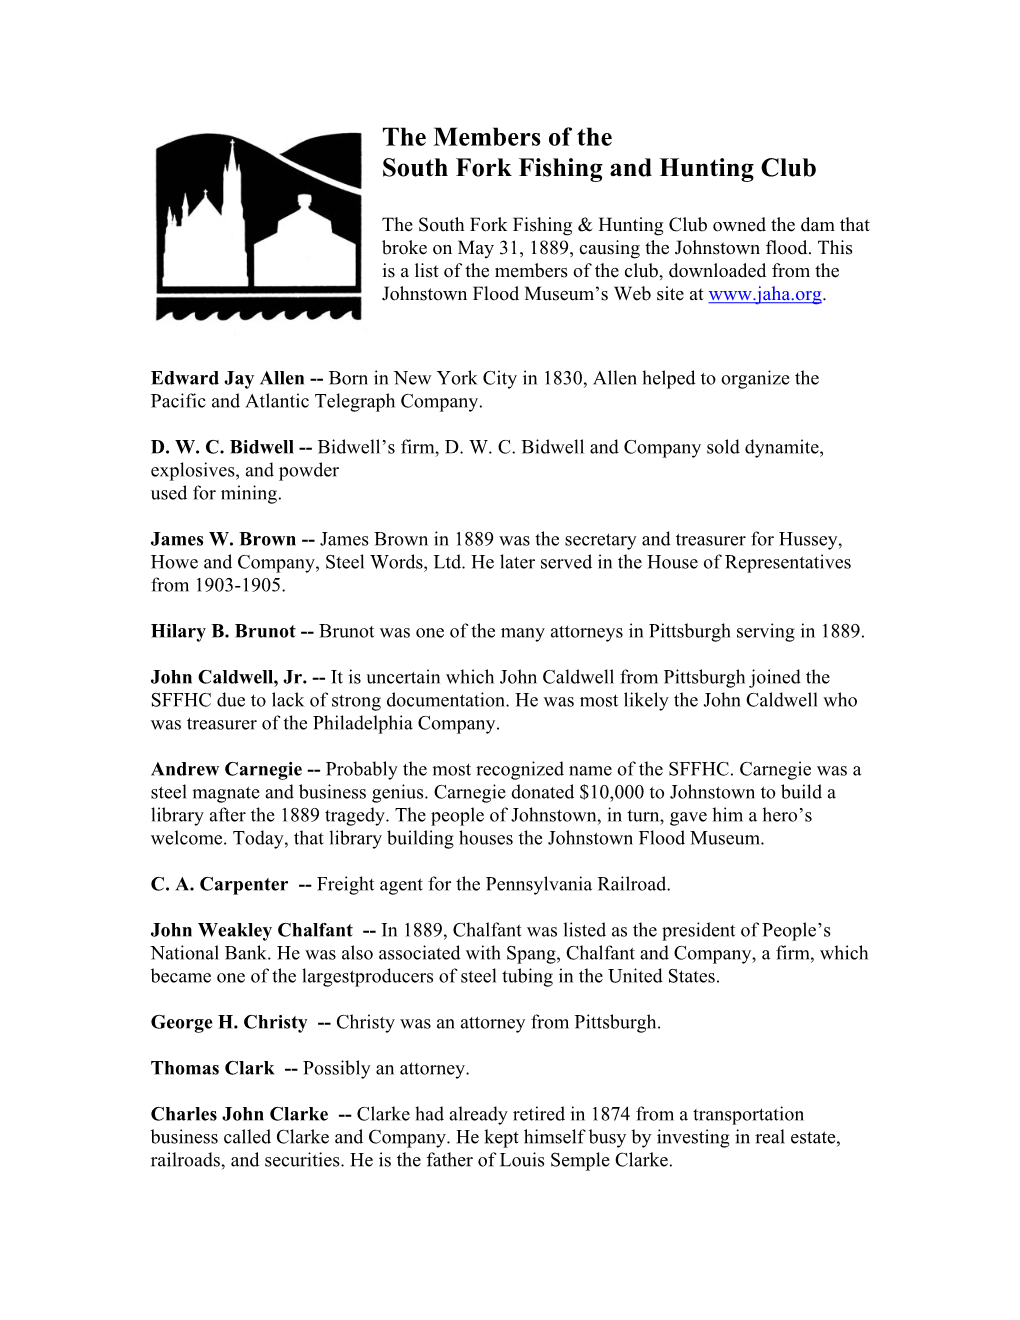 The Members of the South Fork Fishing and Hunting Club